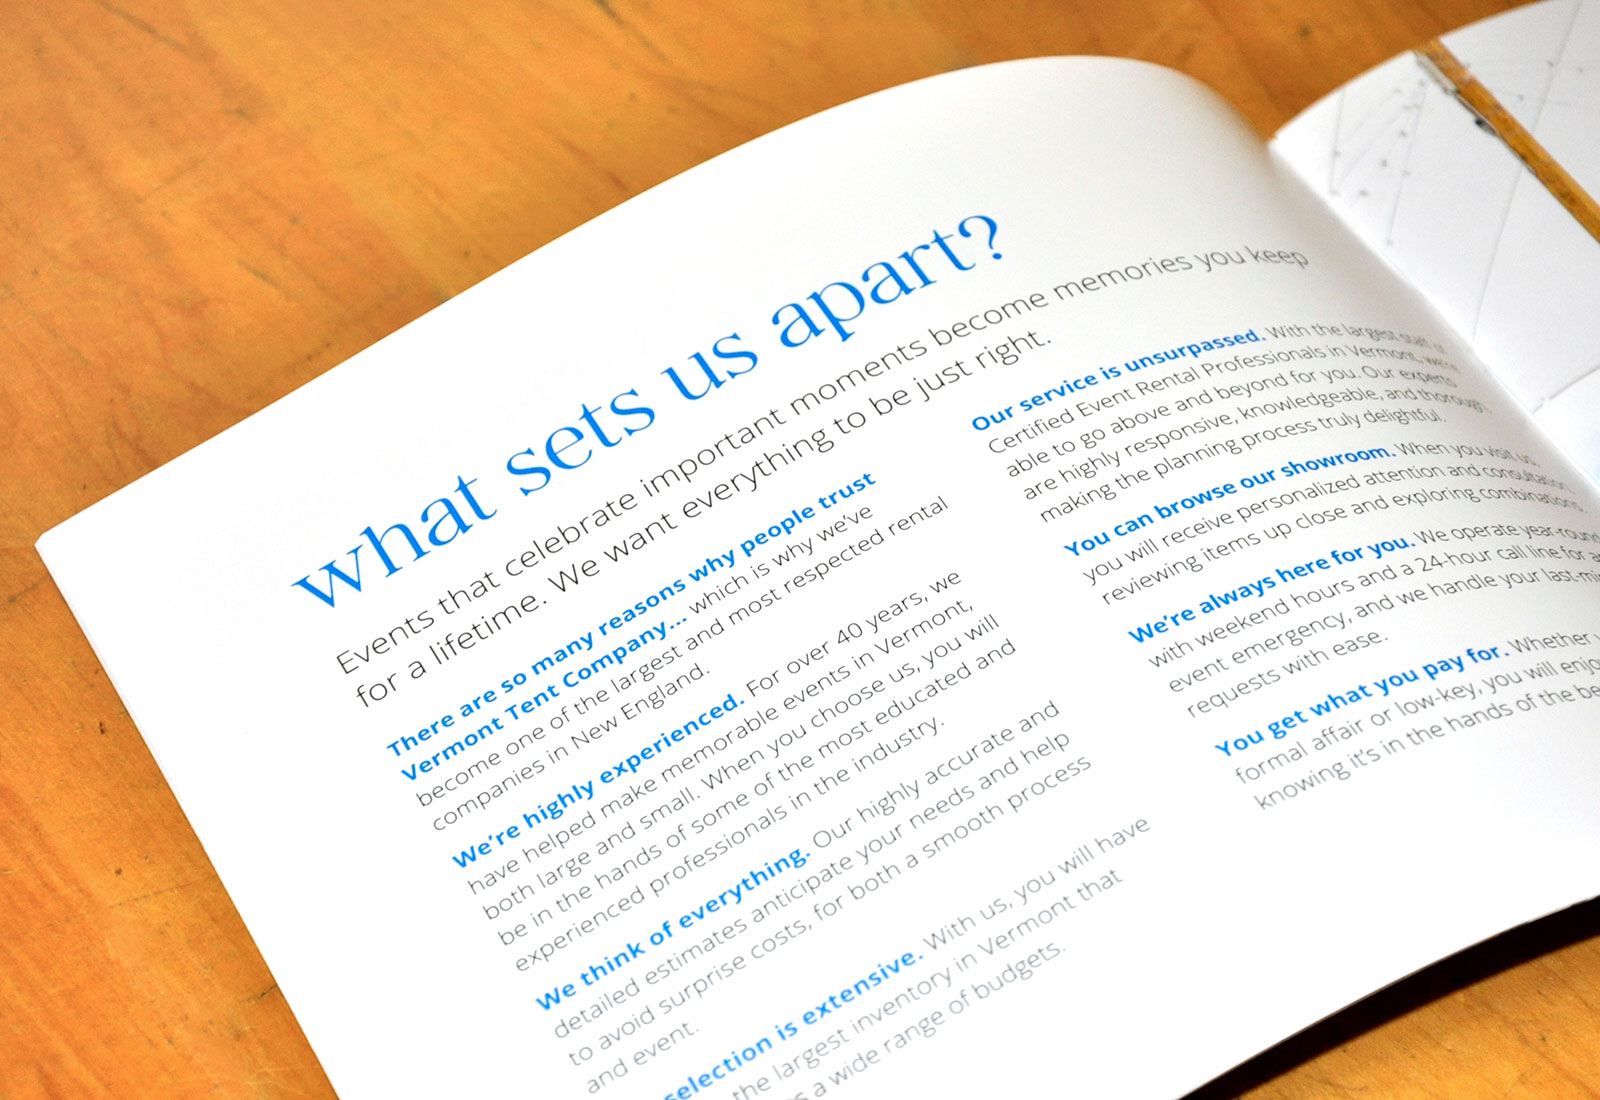 A page of a booklet opened up to a page titled "What sets us apart?"